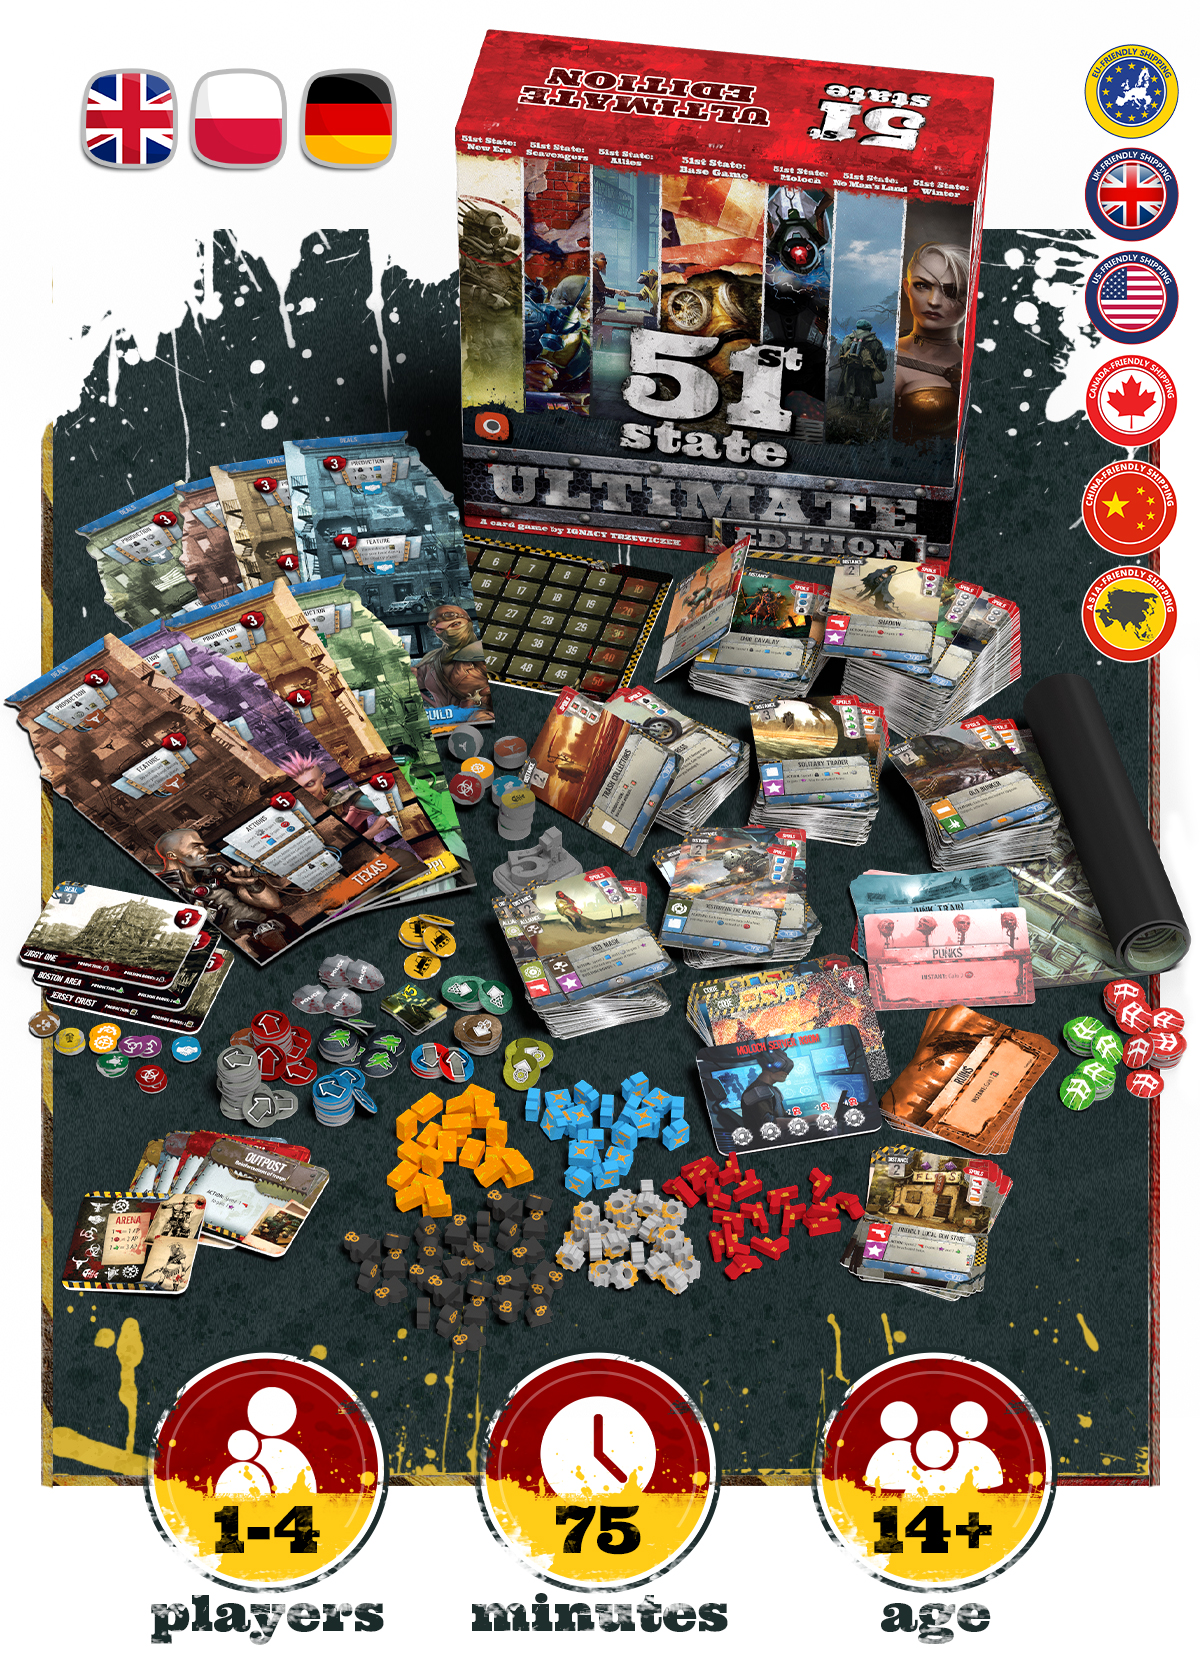 51st State Ultimate Edition By Portal Games Gamefound 2700